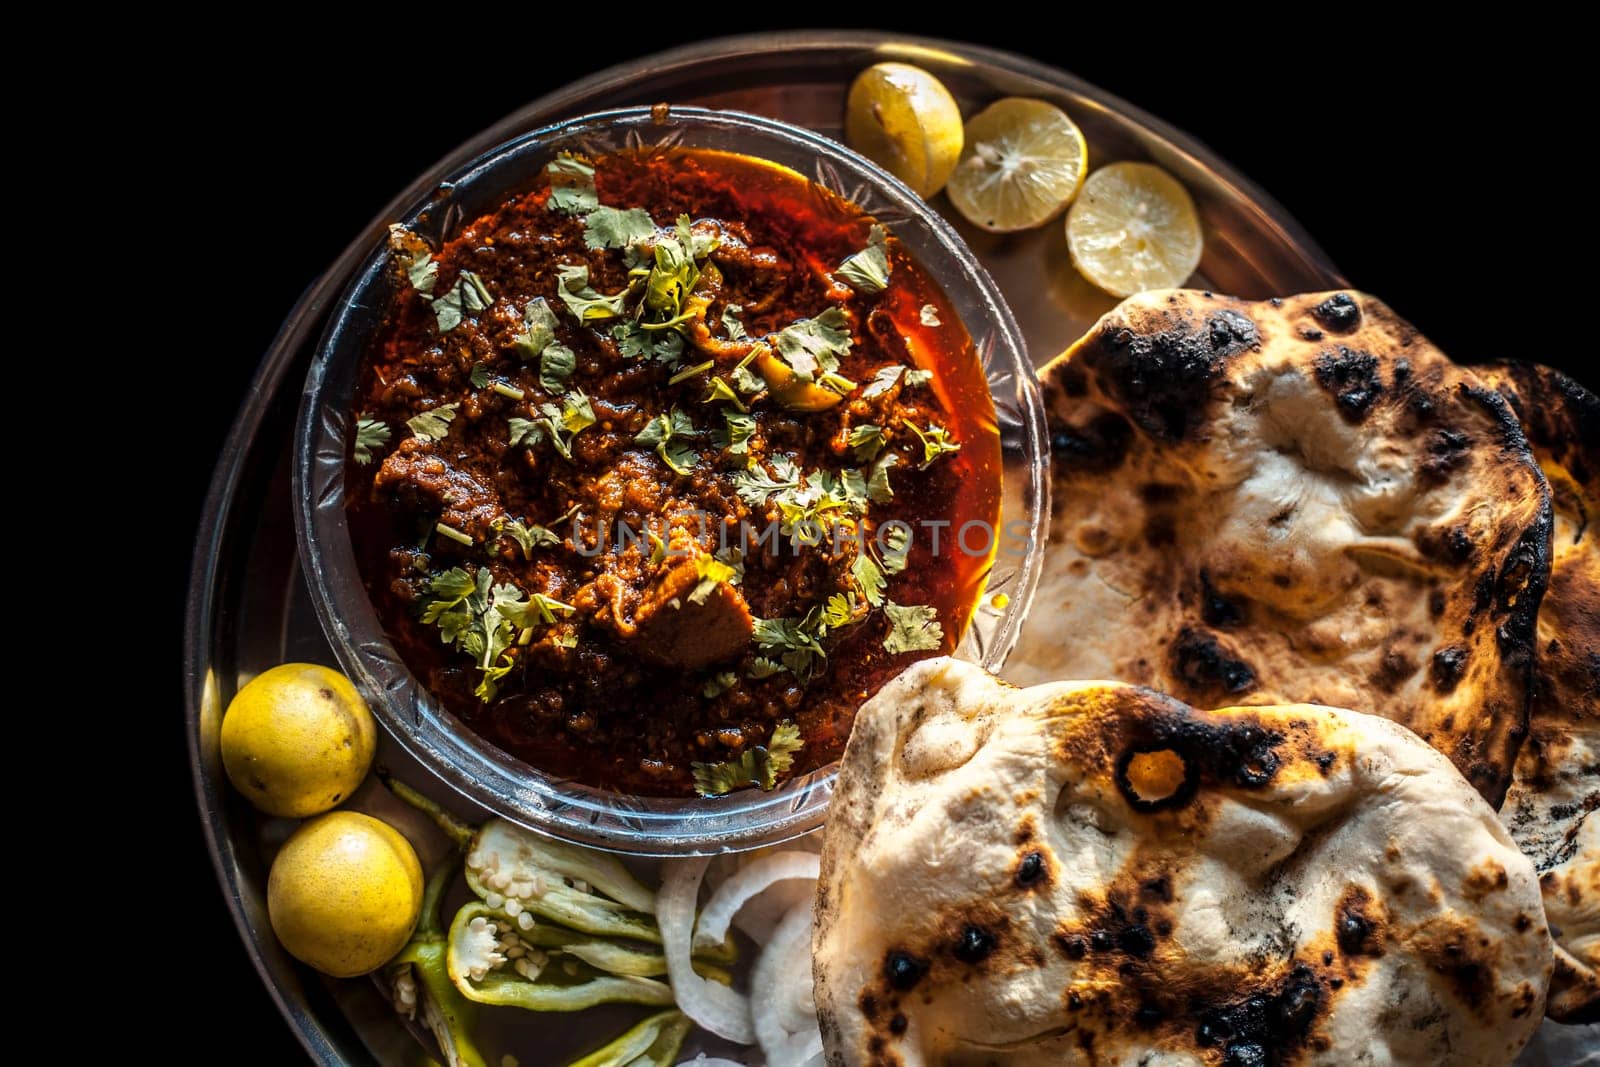 Shot of Achari Chicken along with tandoori roti with it on a serving plate with some chilies, onions, and lemons.